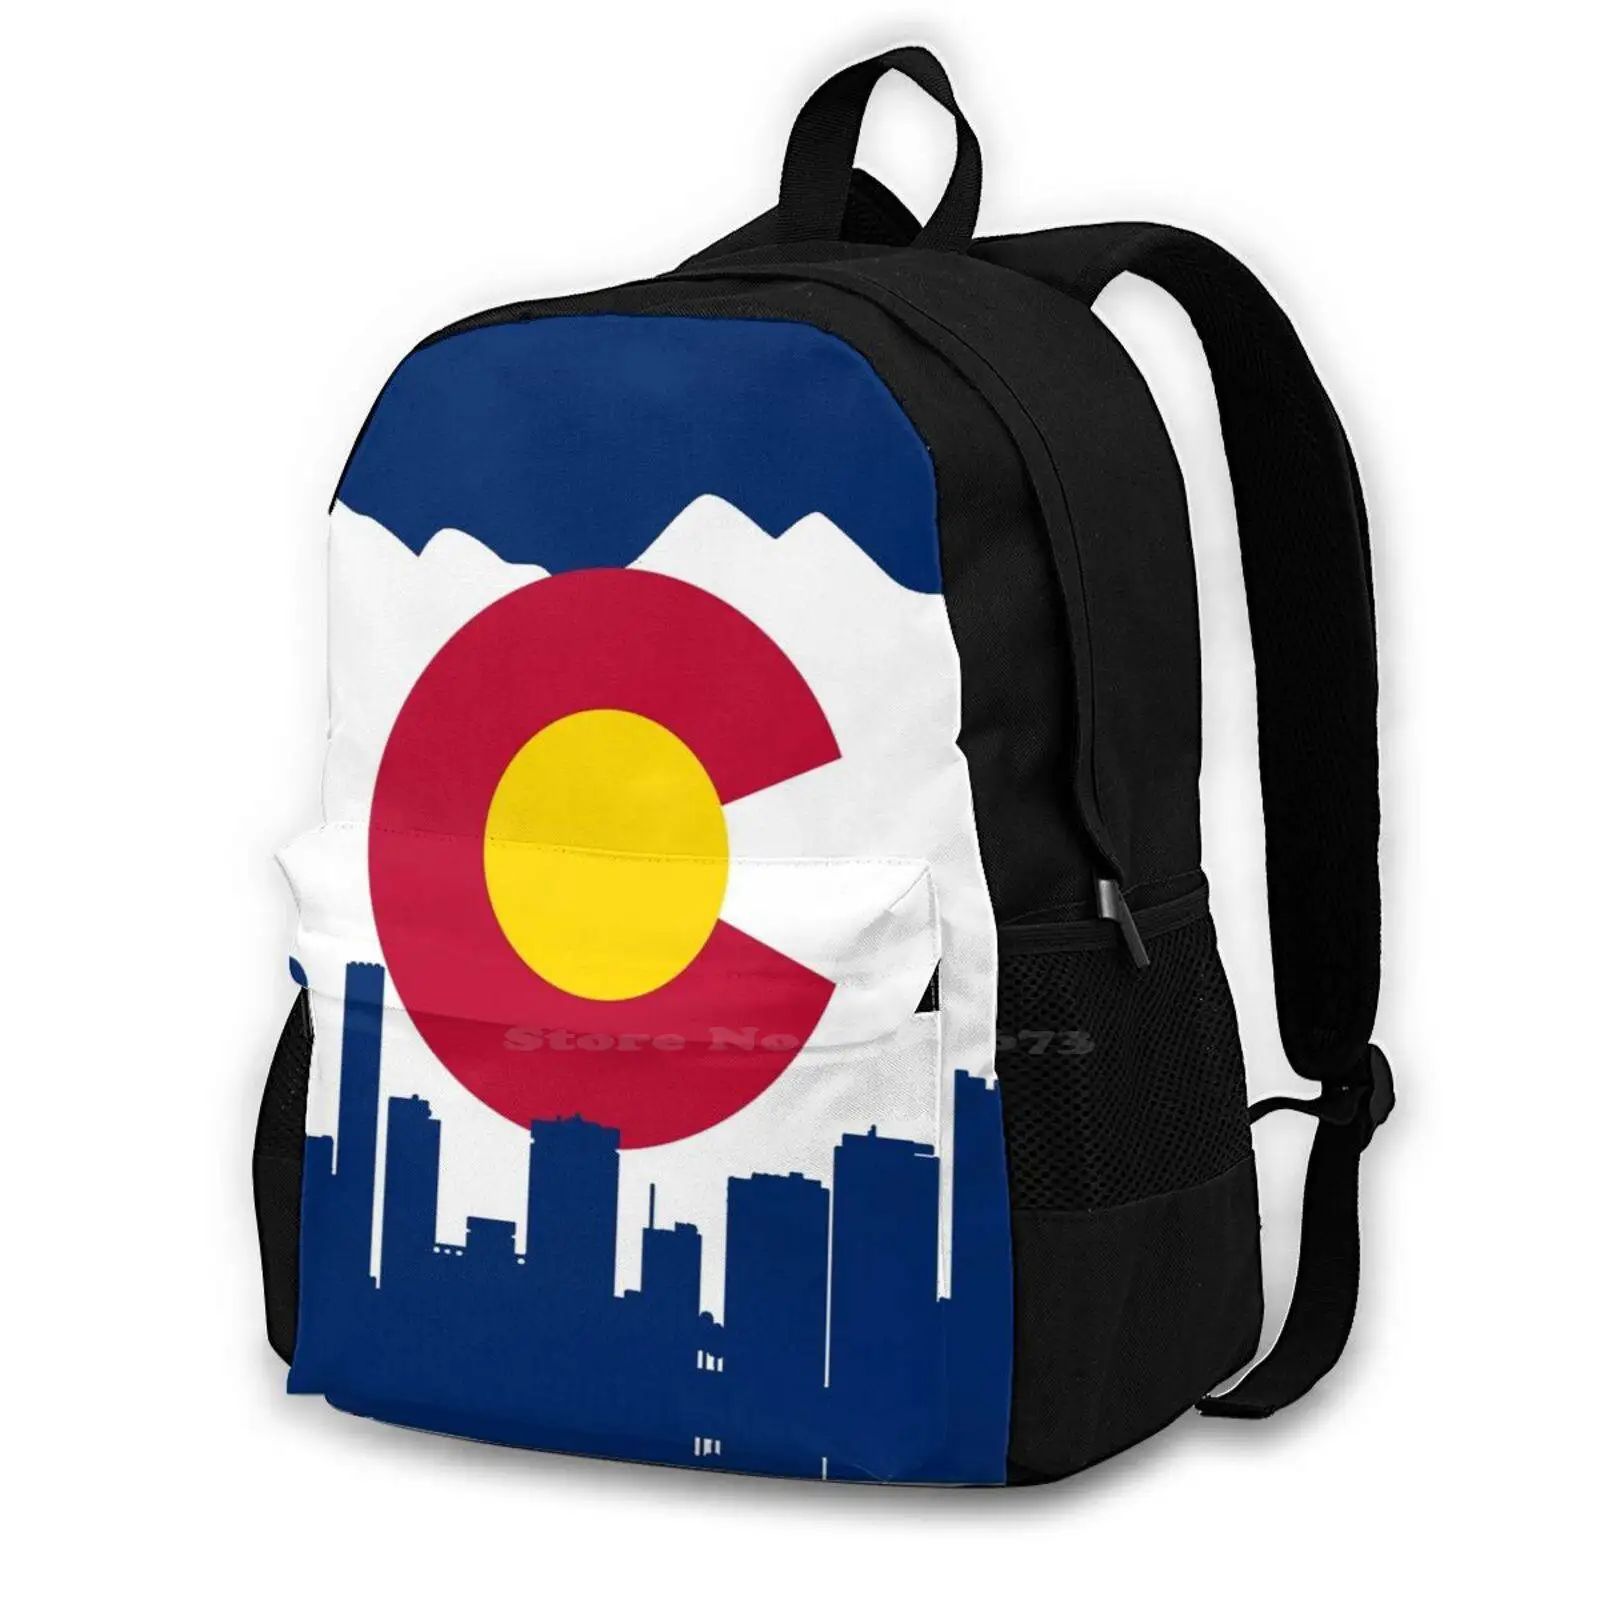 

Colorado Teen College Student Backpack Laptop Travel Bags Colorado Co Weed West Mountain Skiing Snowboarding Nature Explore